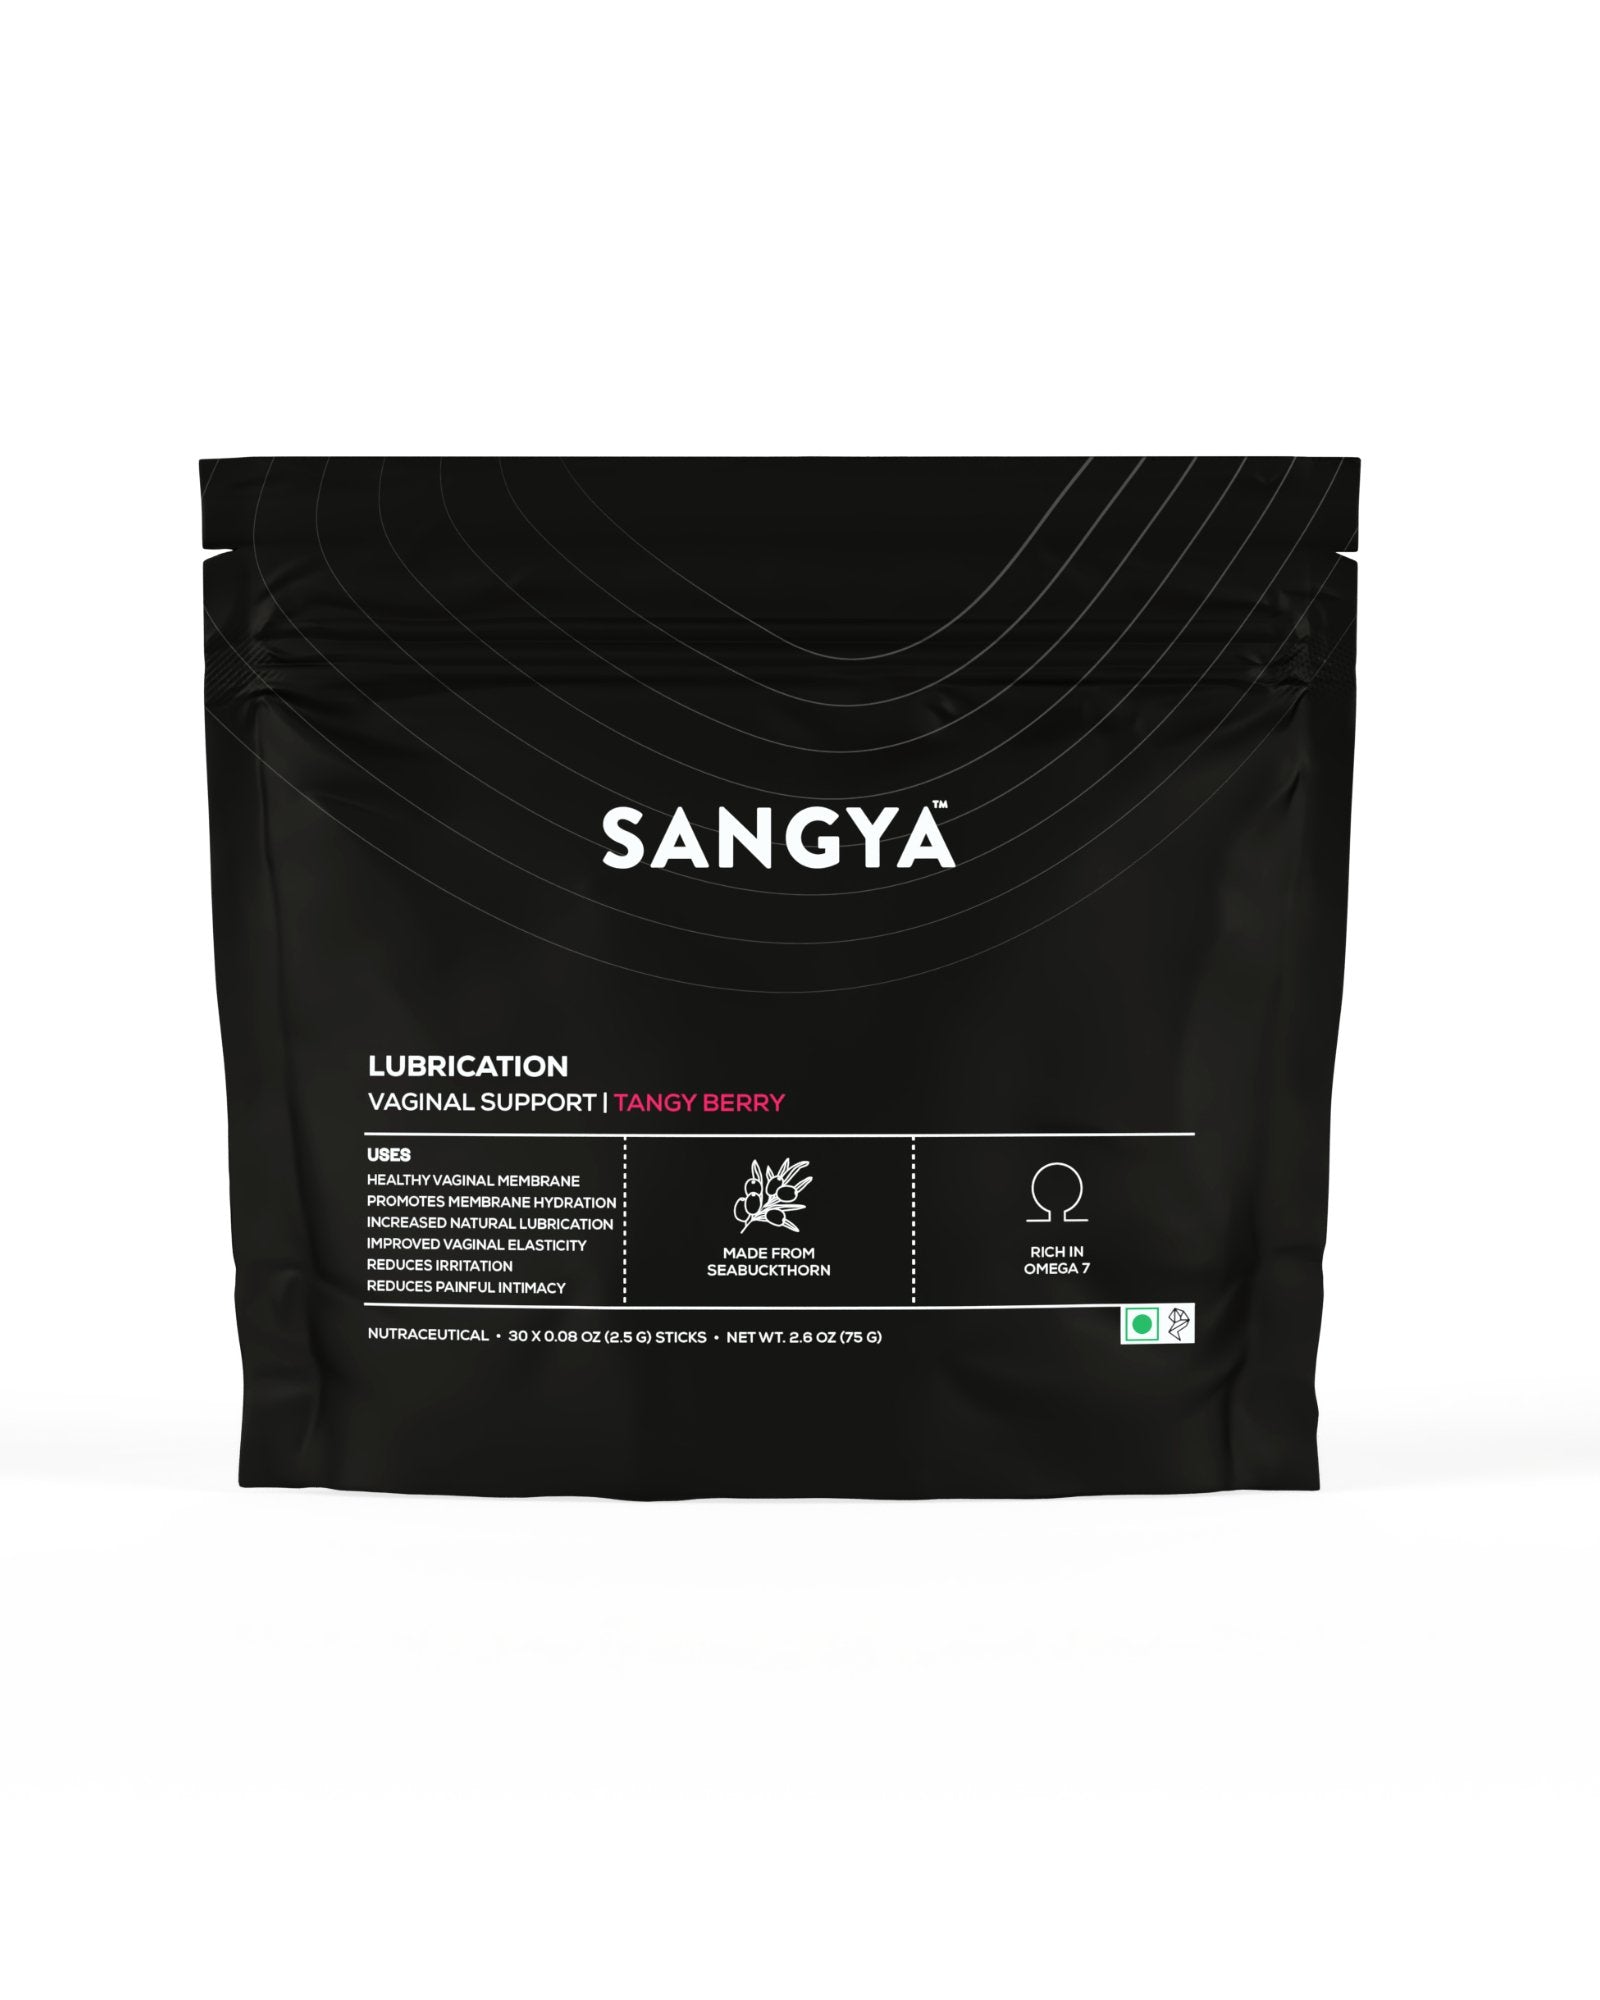 Sangya Lubrication Supplement - Your Key to Intimate Wellness